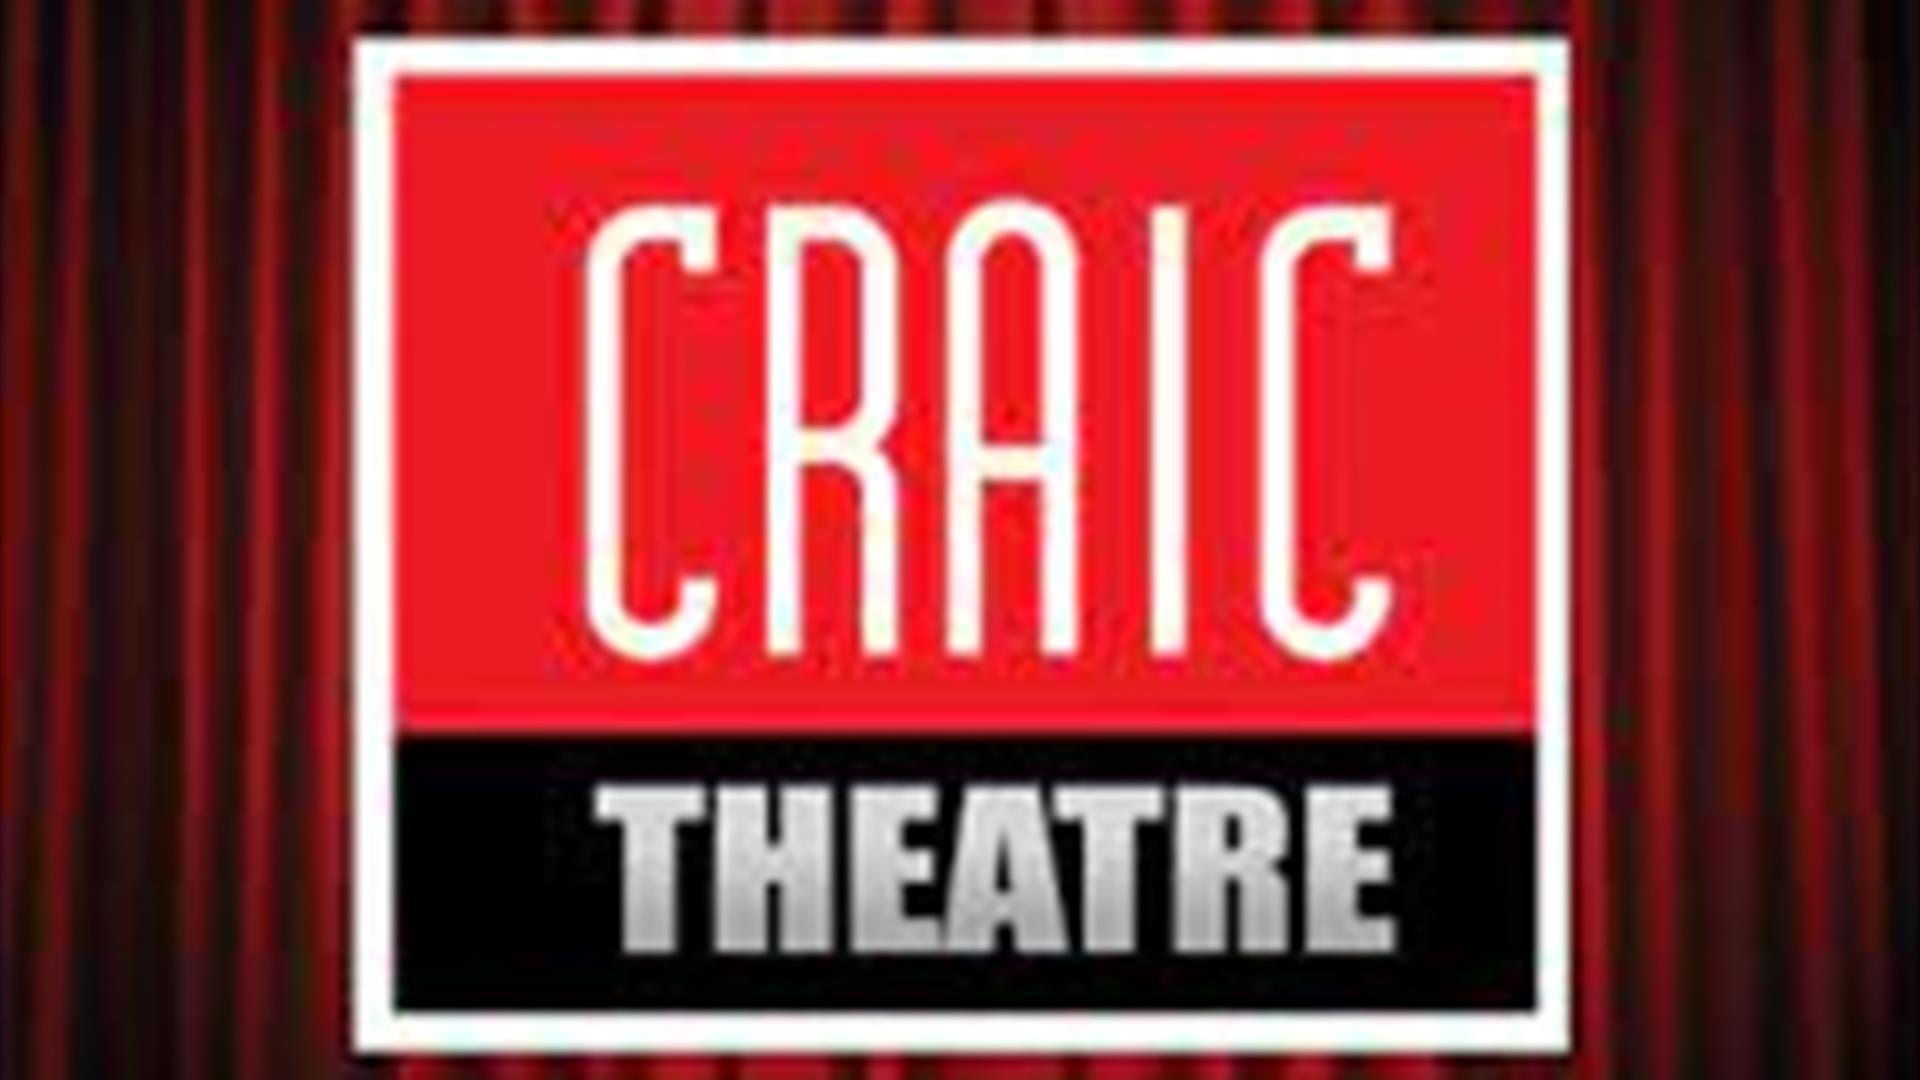 Craic theatre logo in words in front of red curtain